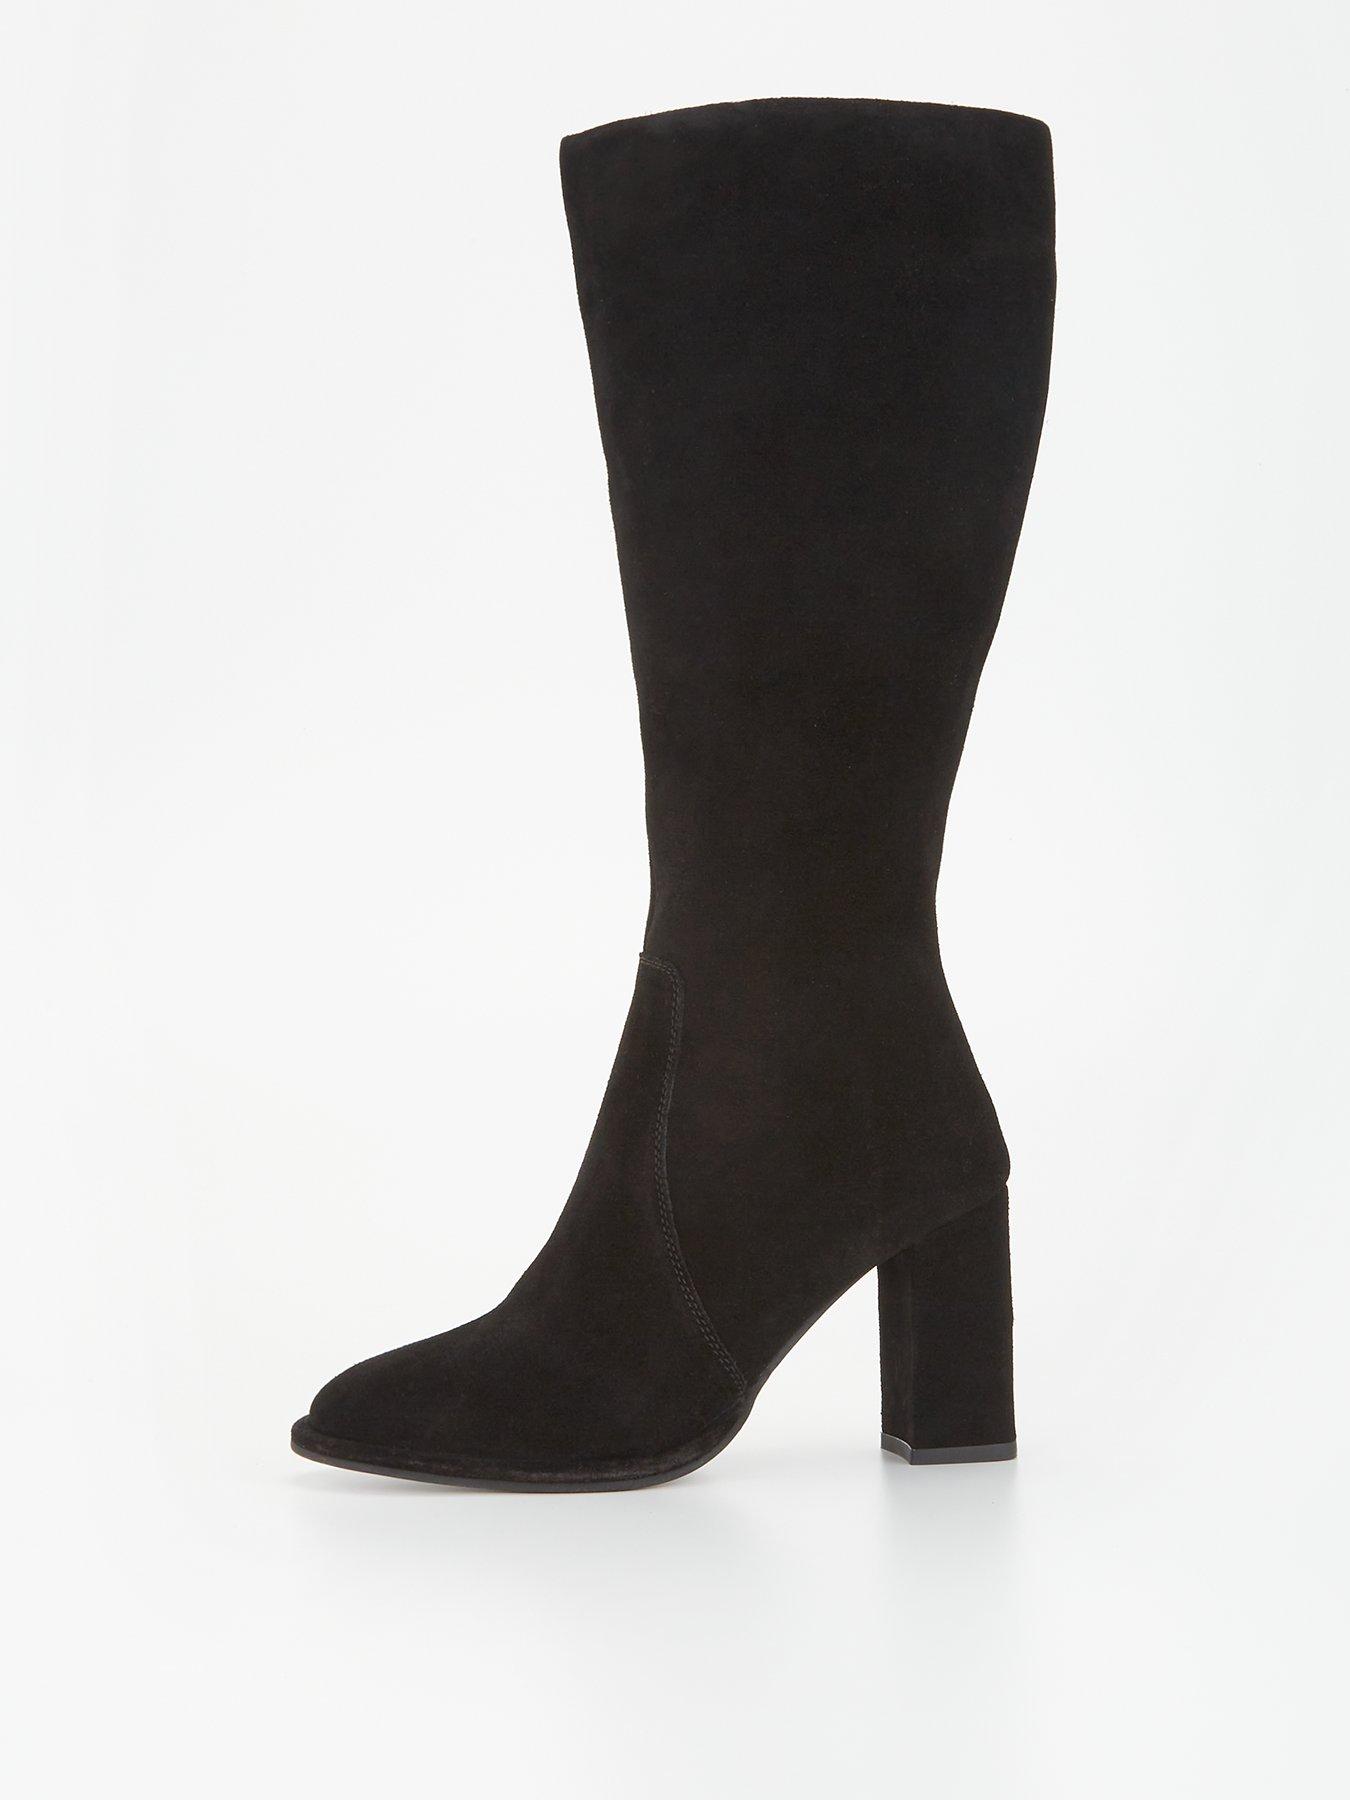 Buy Black Boots for Women by STYLESTRY Online | Ajio.com